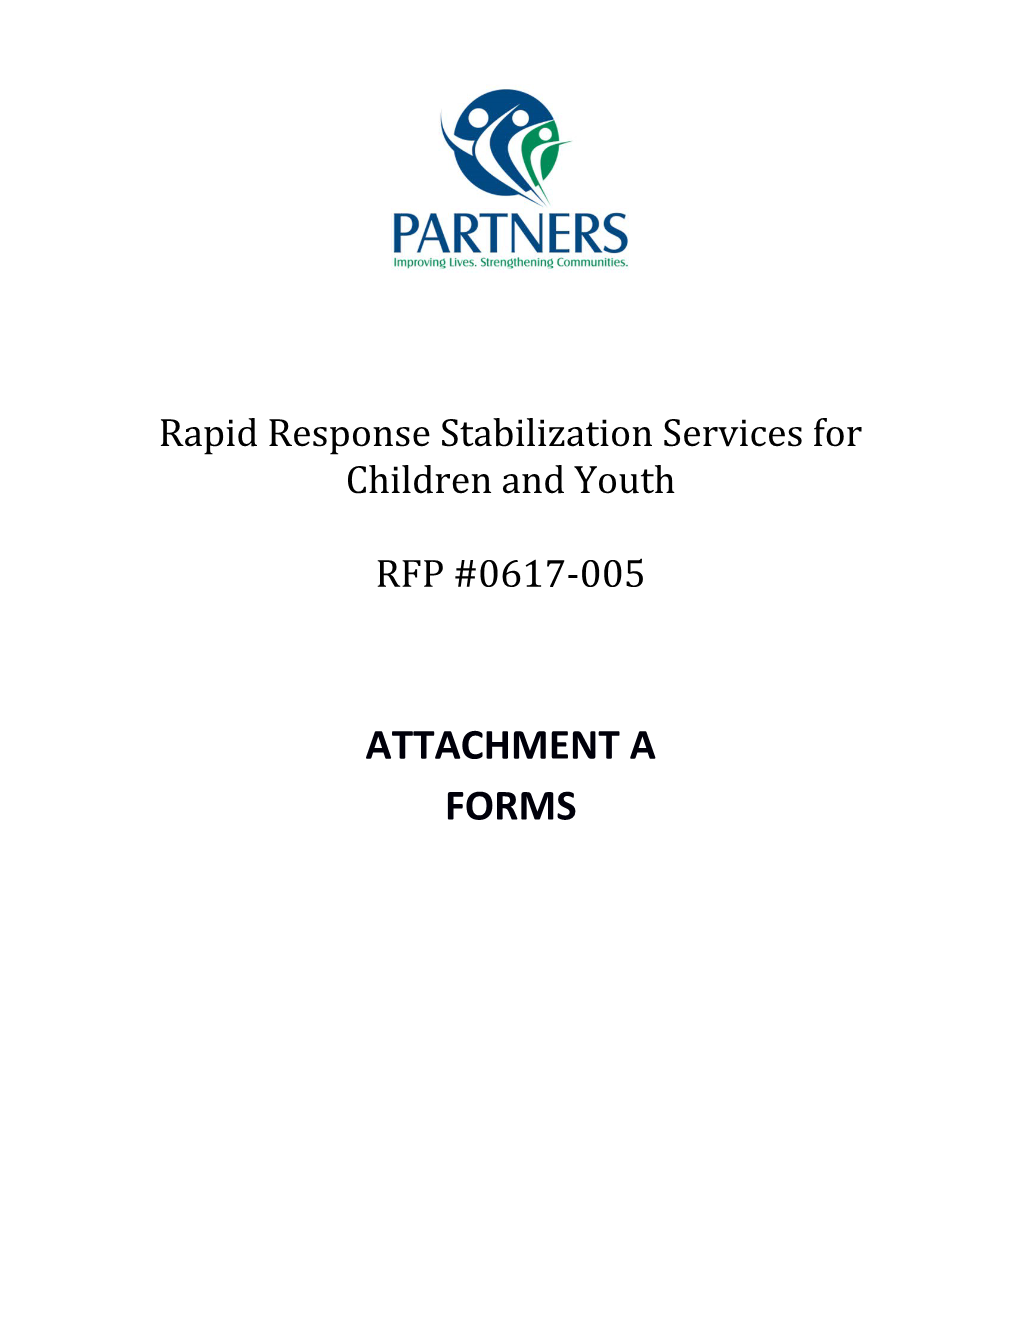 Rapid Response Stabilization Services for Children and Youth